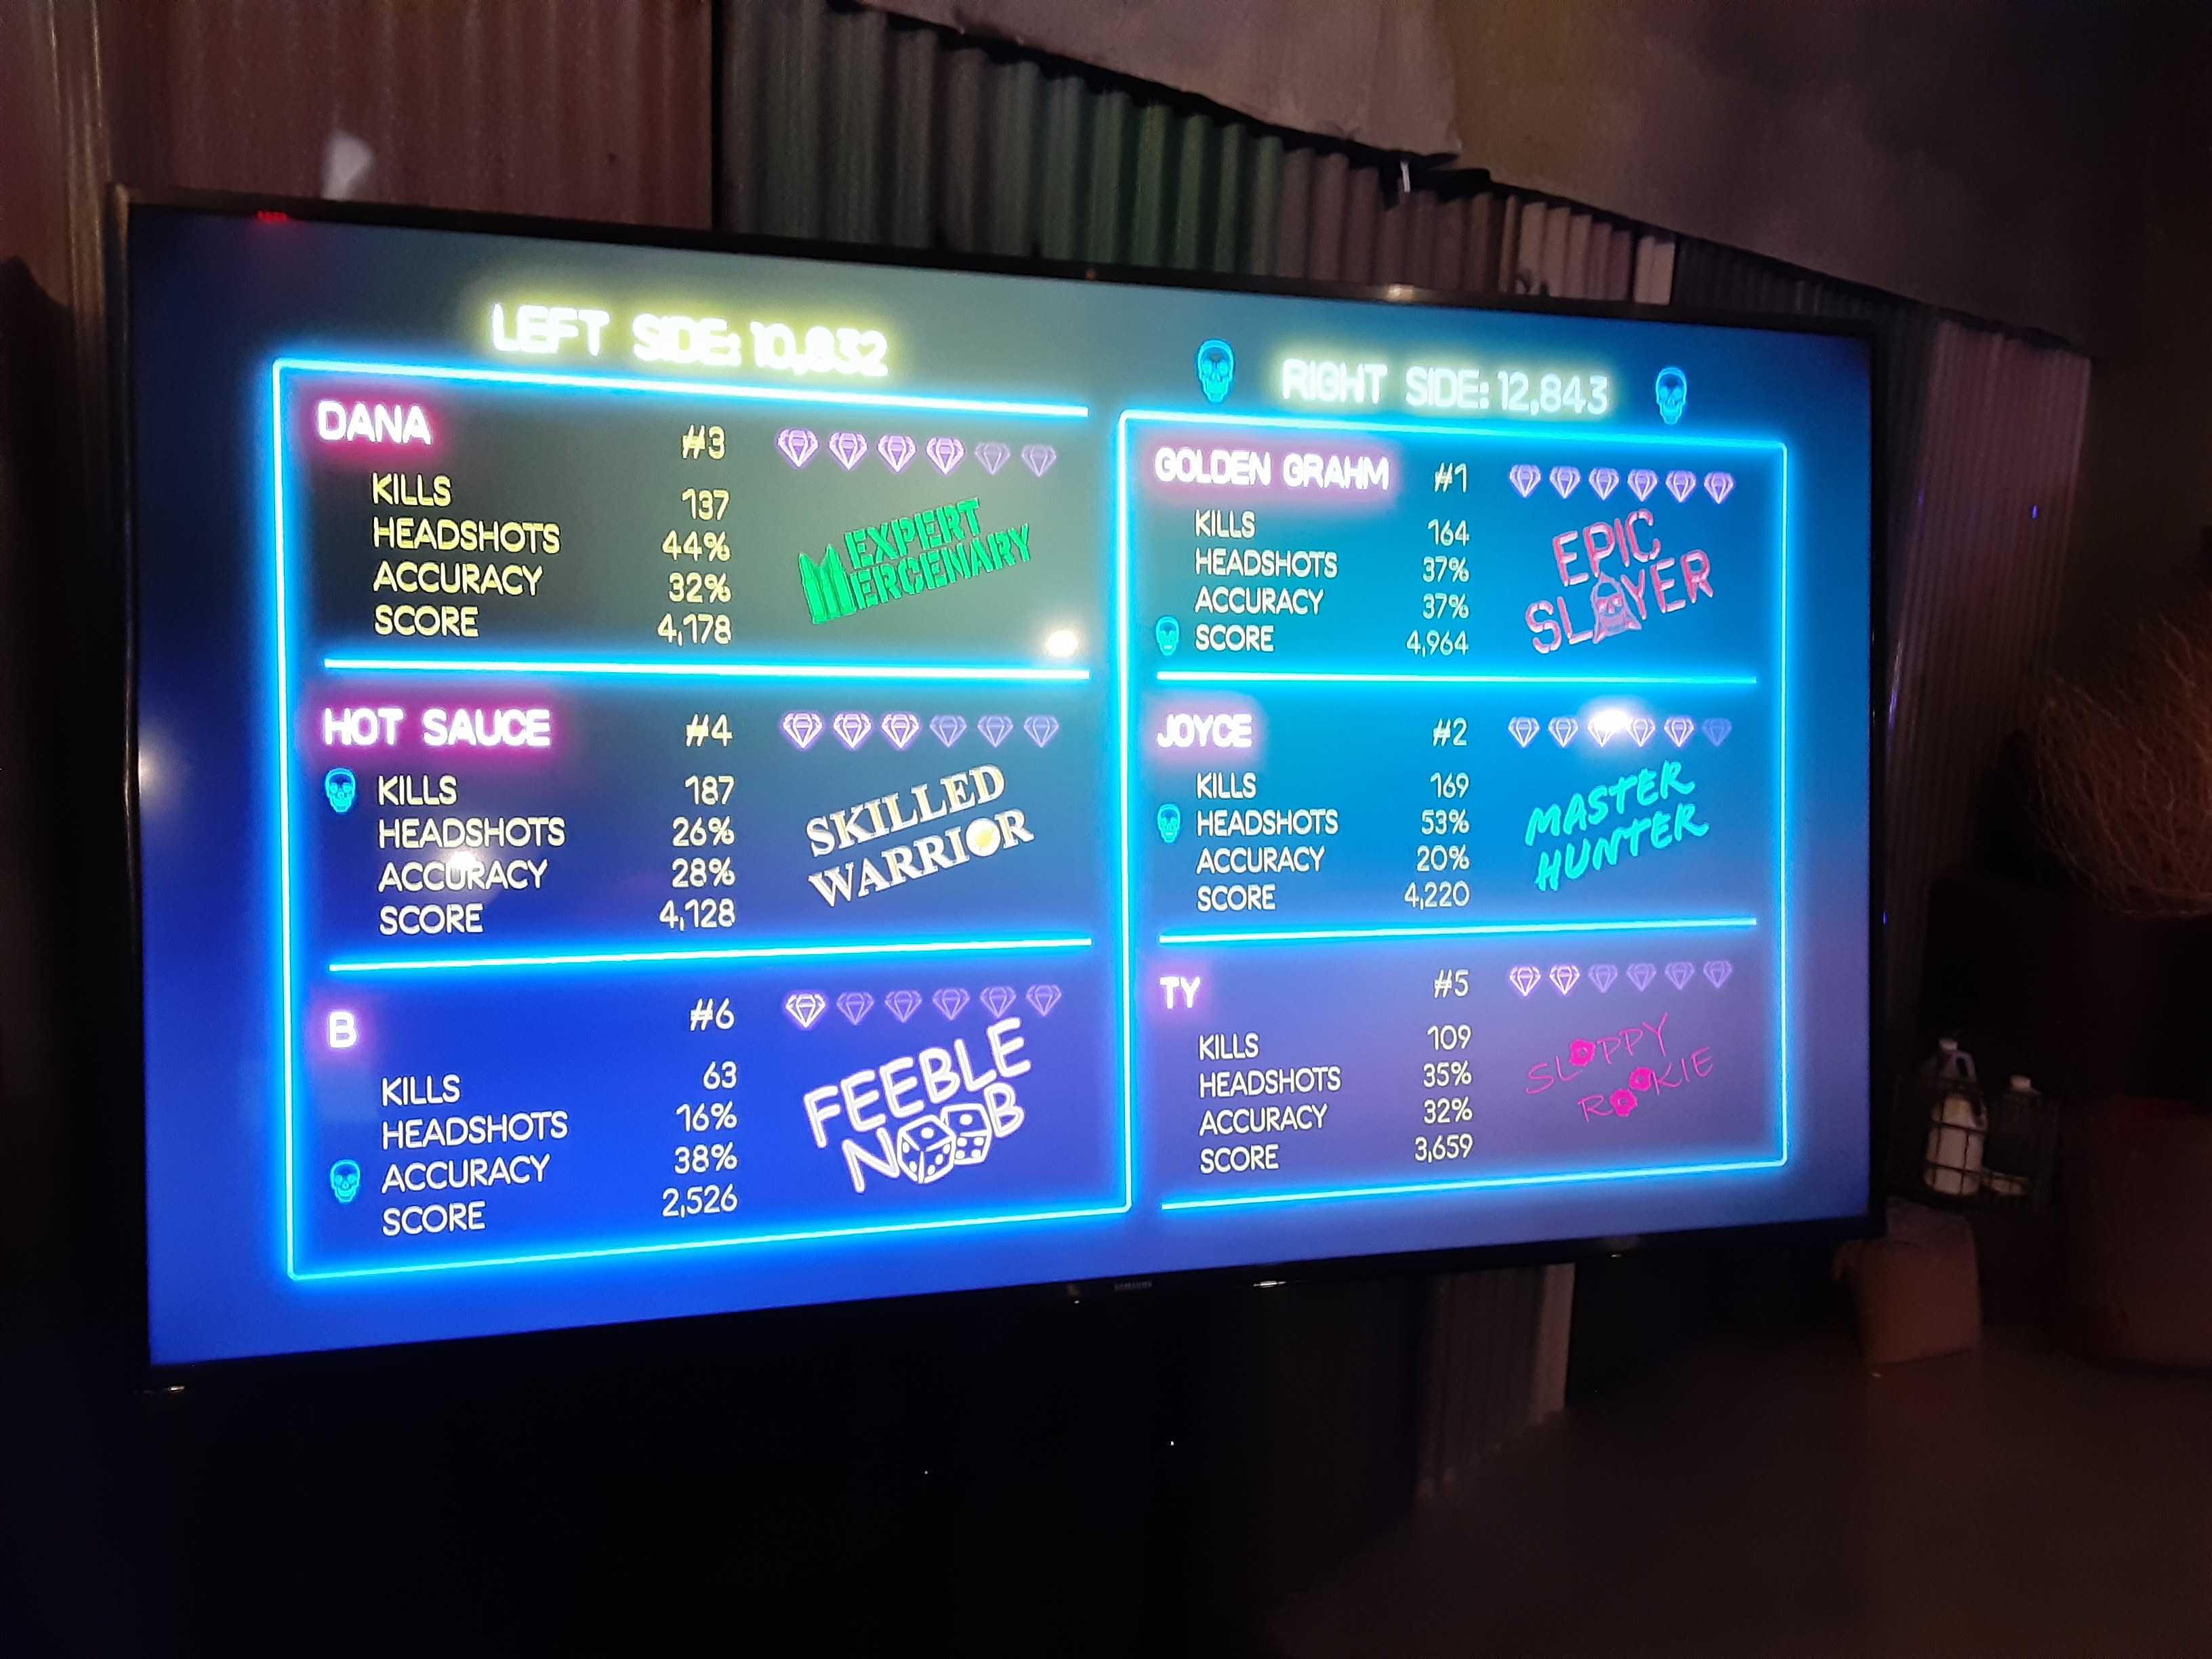 The leaderboard after a zombie killing spree at Viva Las Vengeance